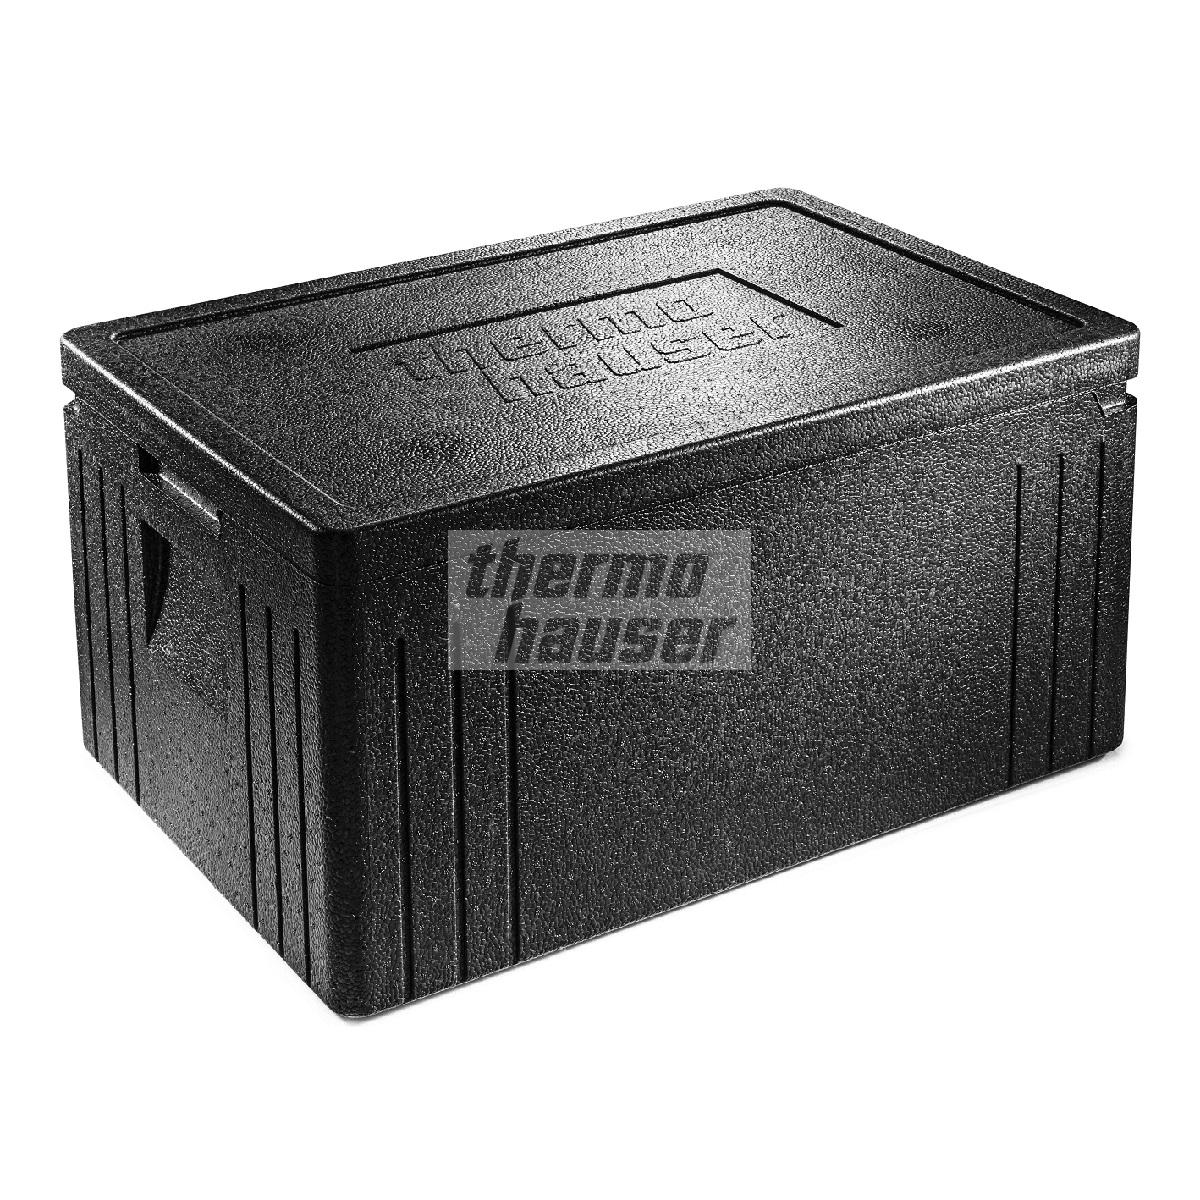 GN 1/1 Eco Line Thermobox, EPP